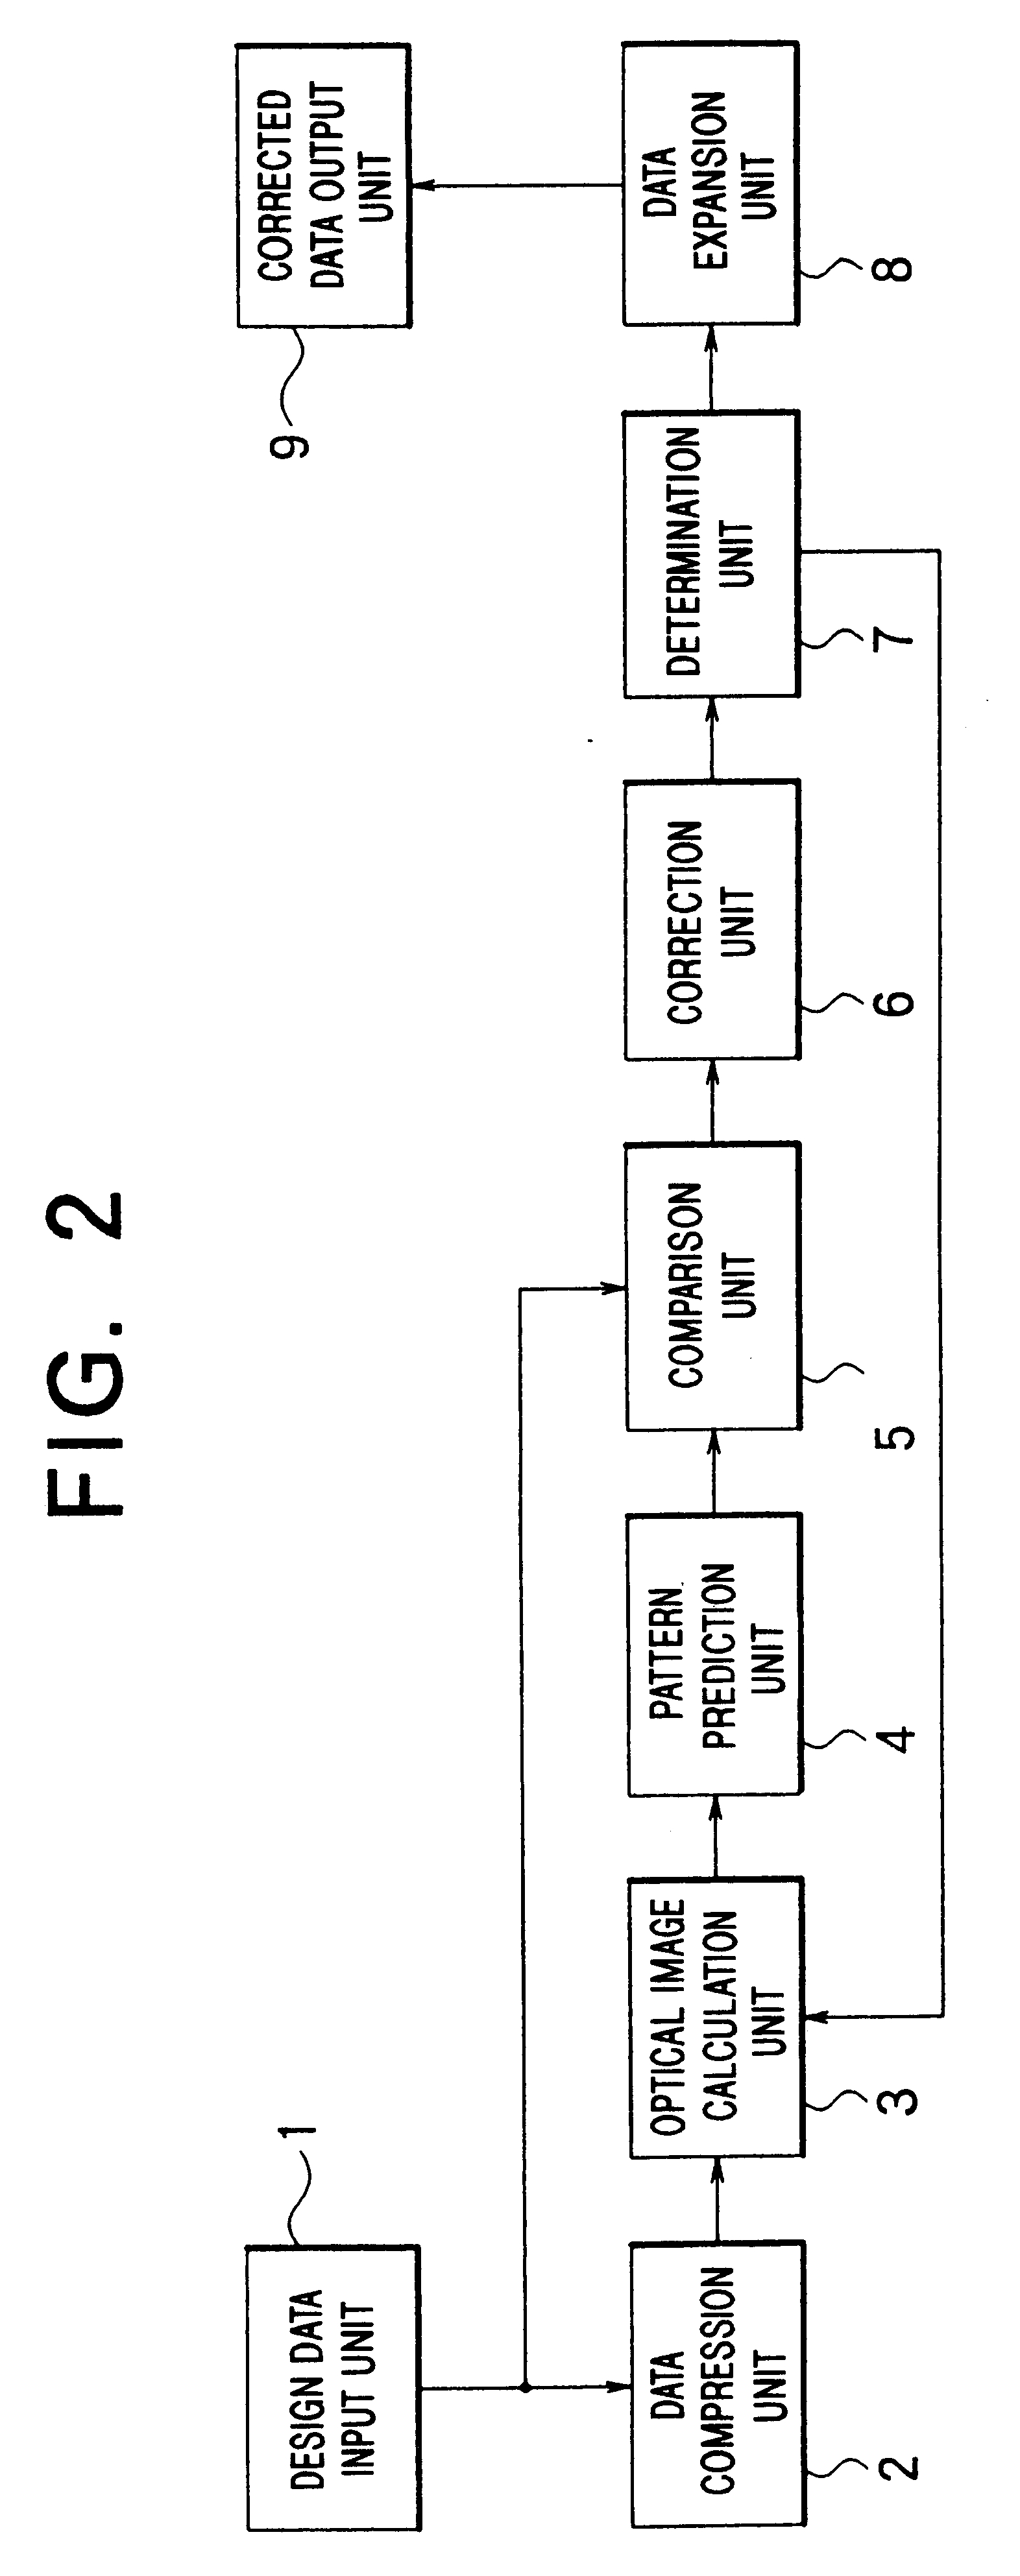 Method of forming a pattern using proximity-effect-correction